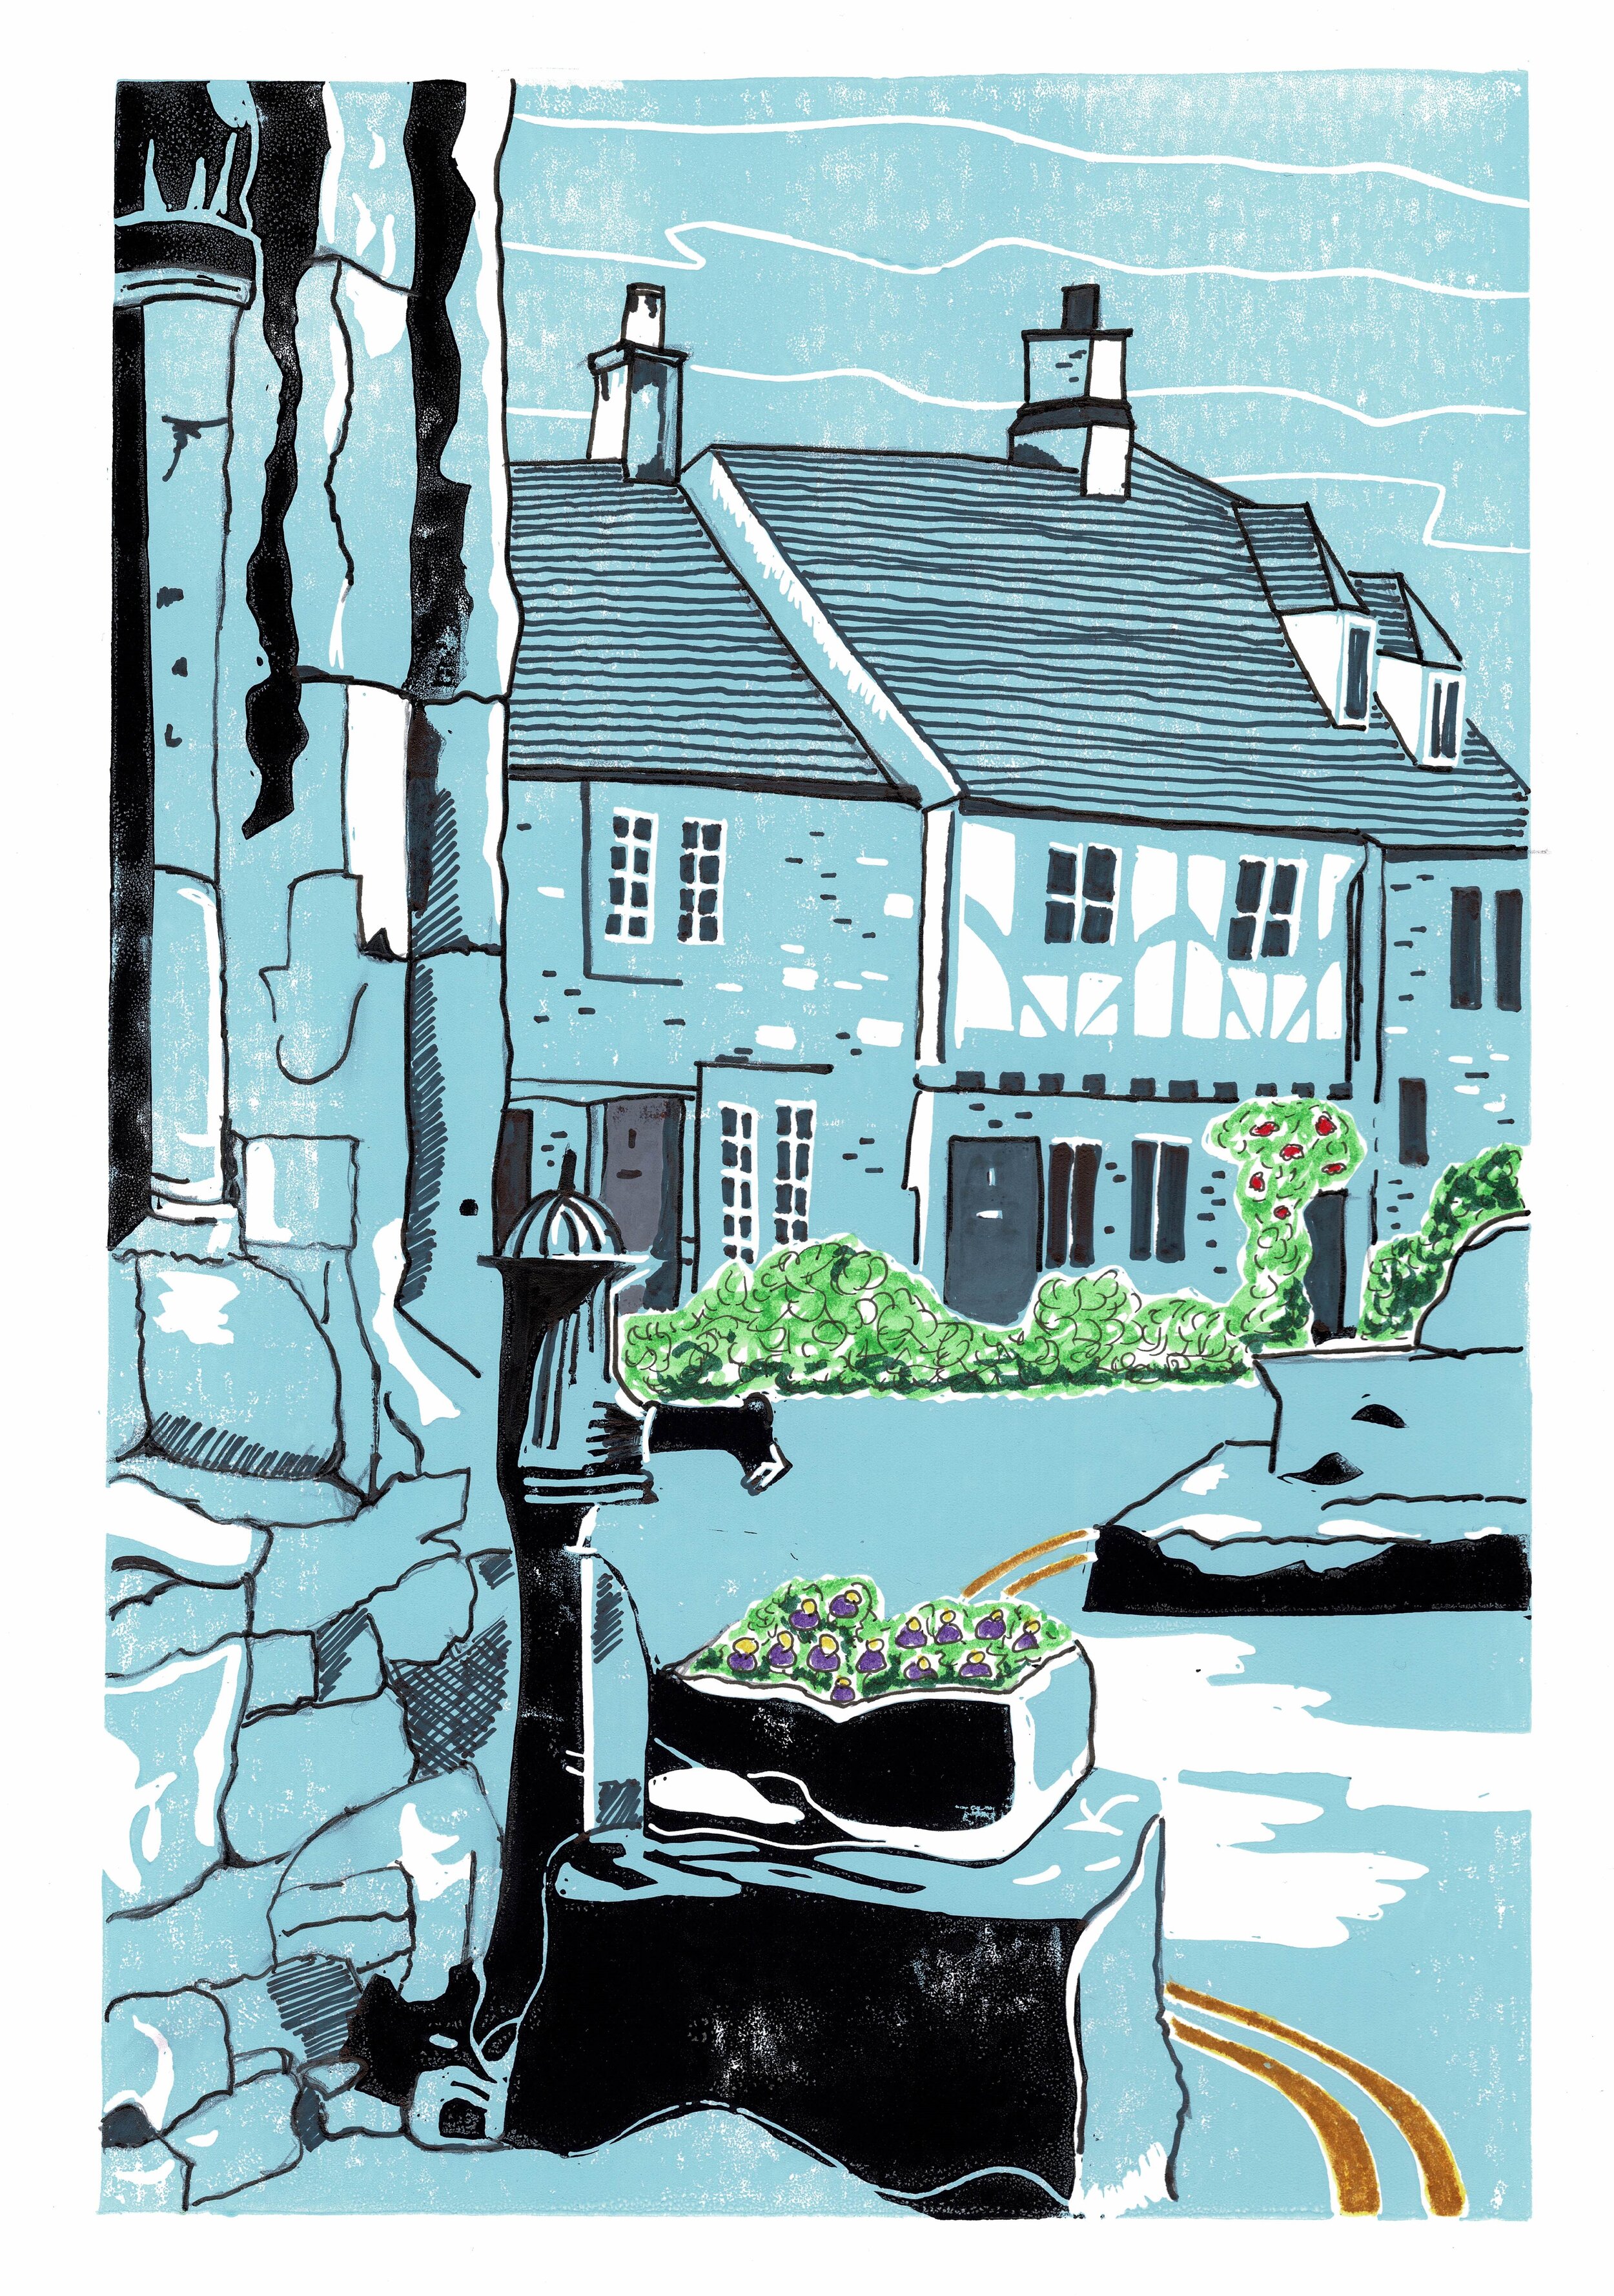 Castle-Combe-Pump-Lino-print-and-watercolour-unframed.jpg